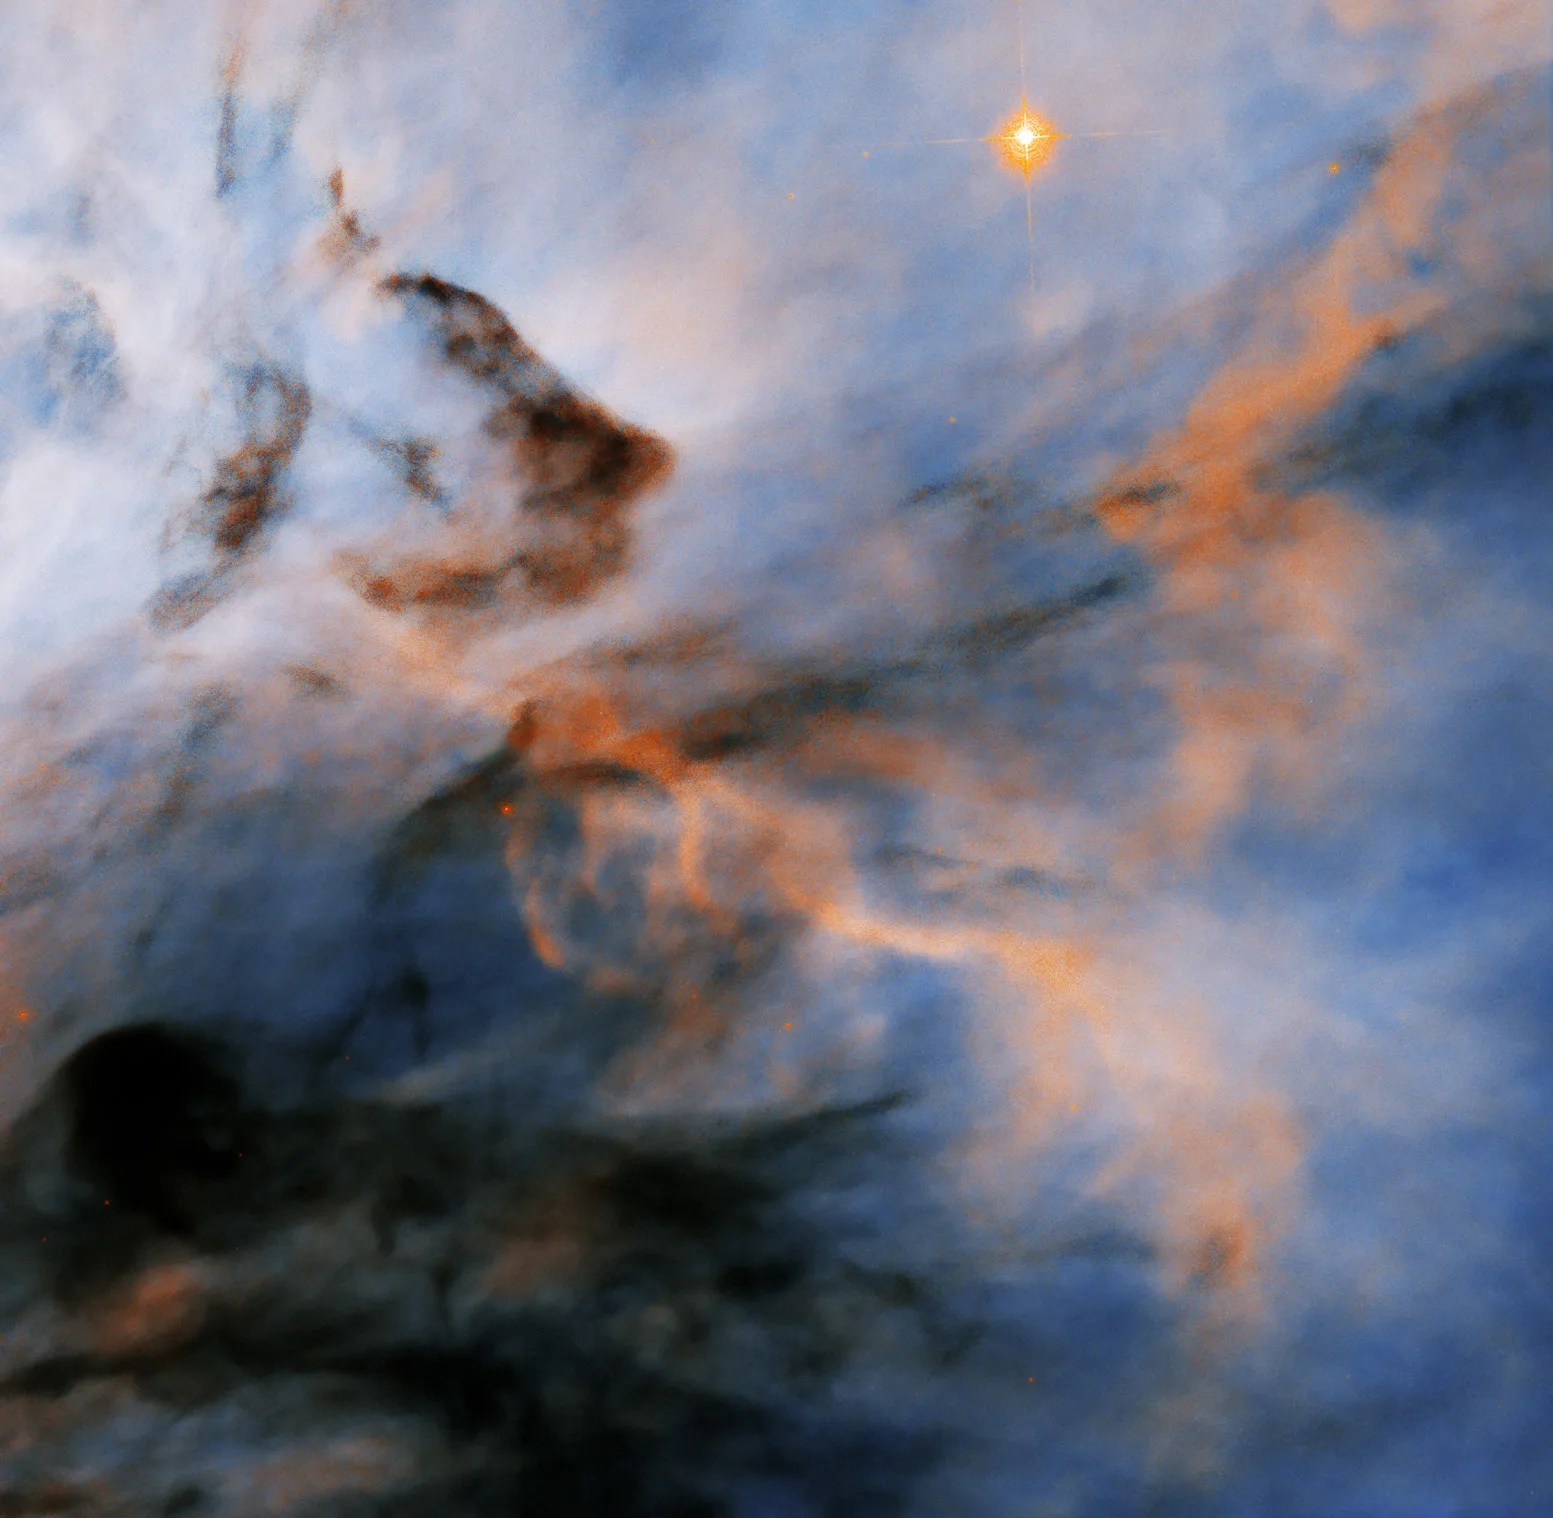 Hubble image of blue and white background cloud superimposed with orange and dark cloudy wisps